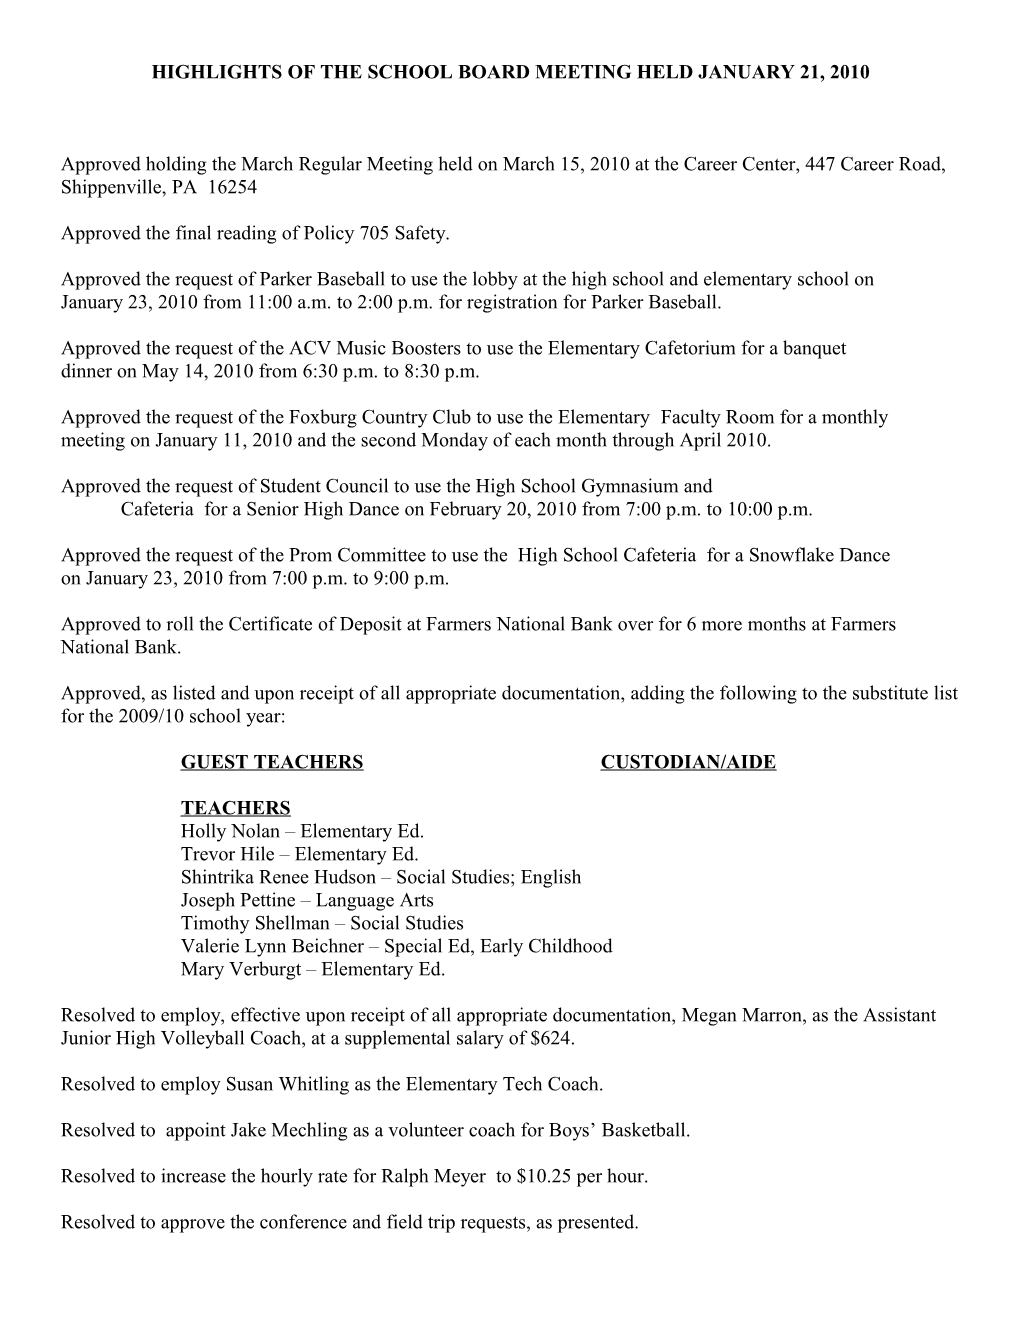 Highlights of the Board Meeting Held Monday, July 9, 2007